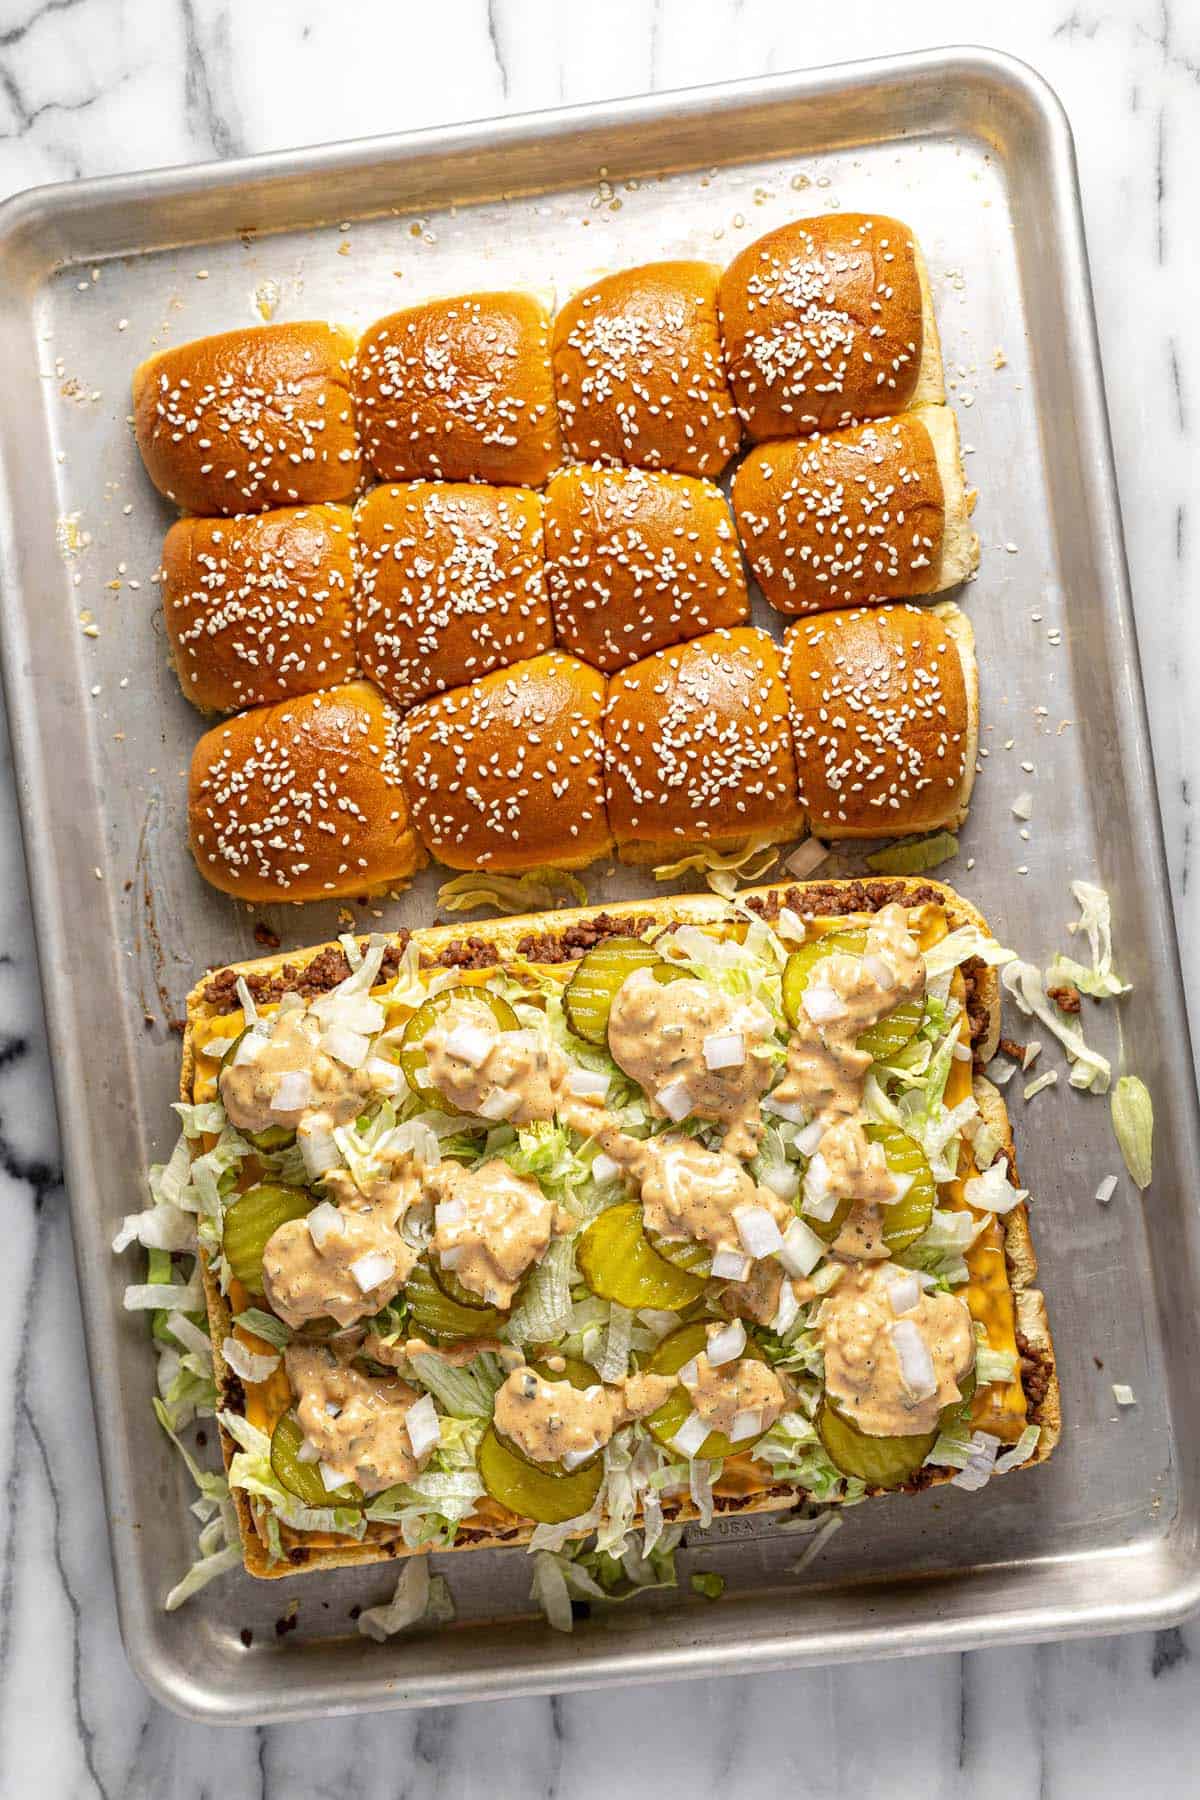 Big Mac sliders fresh from the oven topped with lettuce, pickles, and burger sauce. 